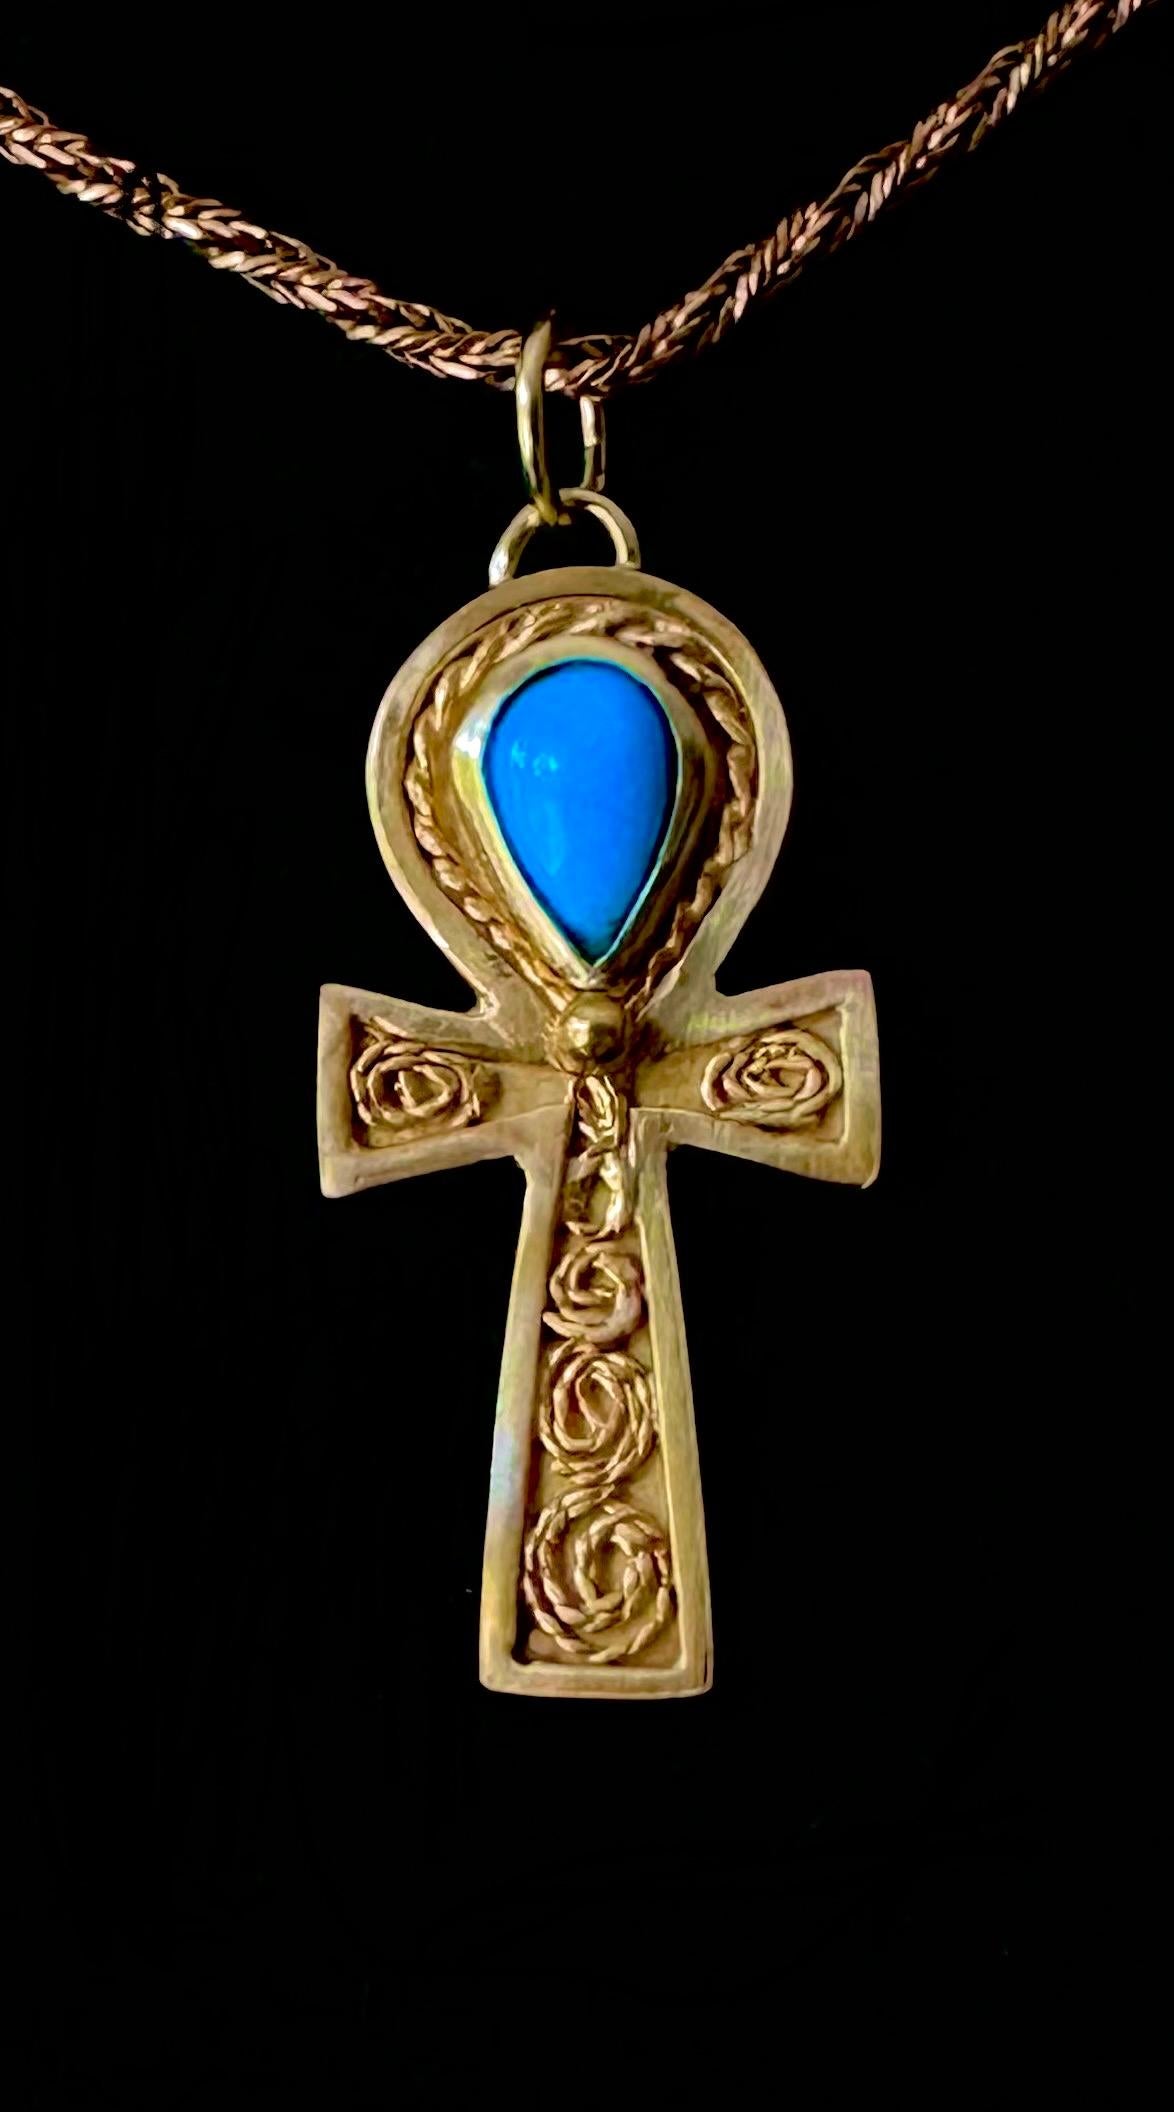 -Available
-Handmade
-One of a kind 
-22K Gold Filigree wire
-18K Gold Frame
- Sleeping Beauty Turquoise 
 -Stamped with the Nebu logo
-This is sold as the Pendant only.

Ankh…or the Key of Life

A symbol of eternity in ancient Egypt.

This pendant